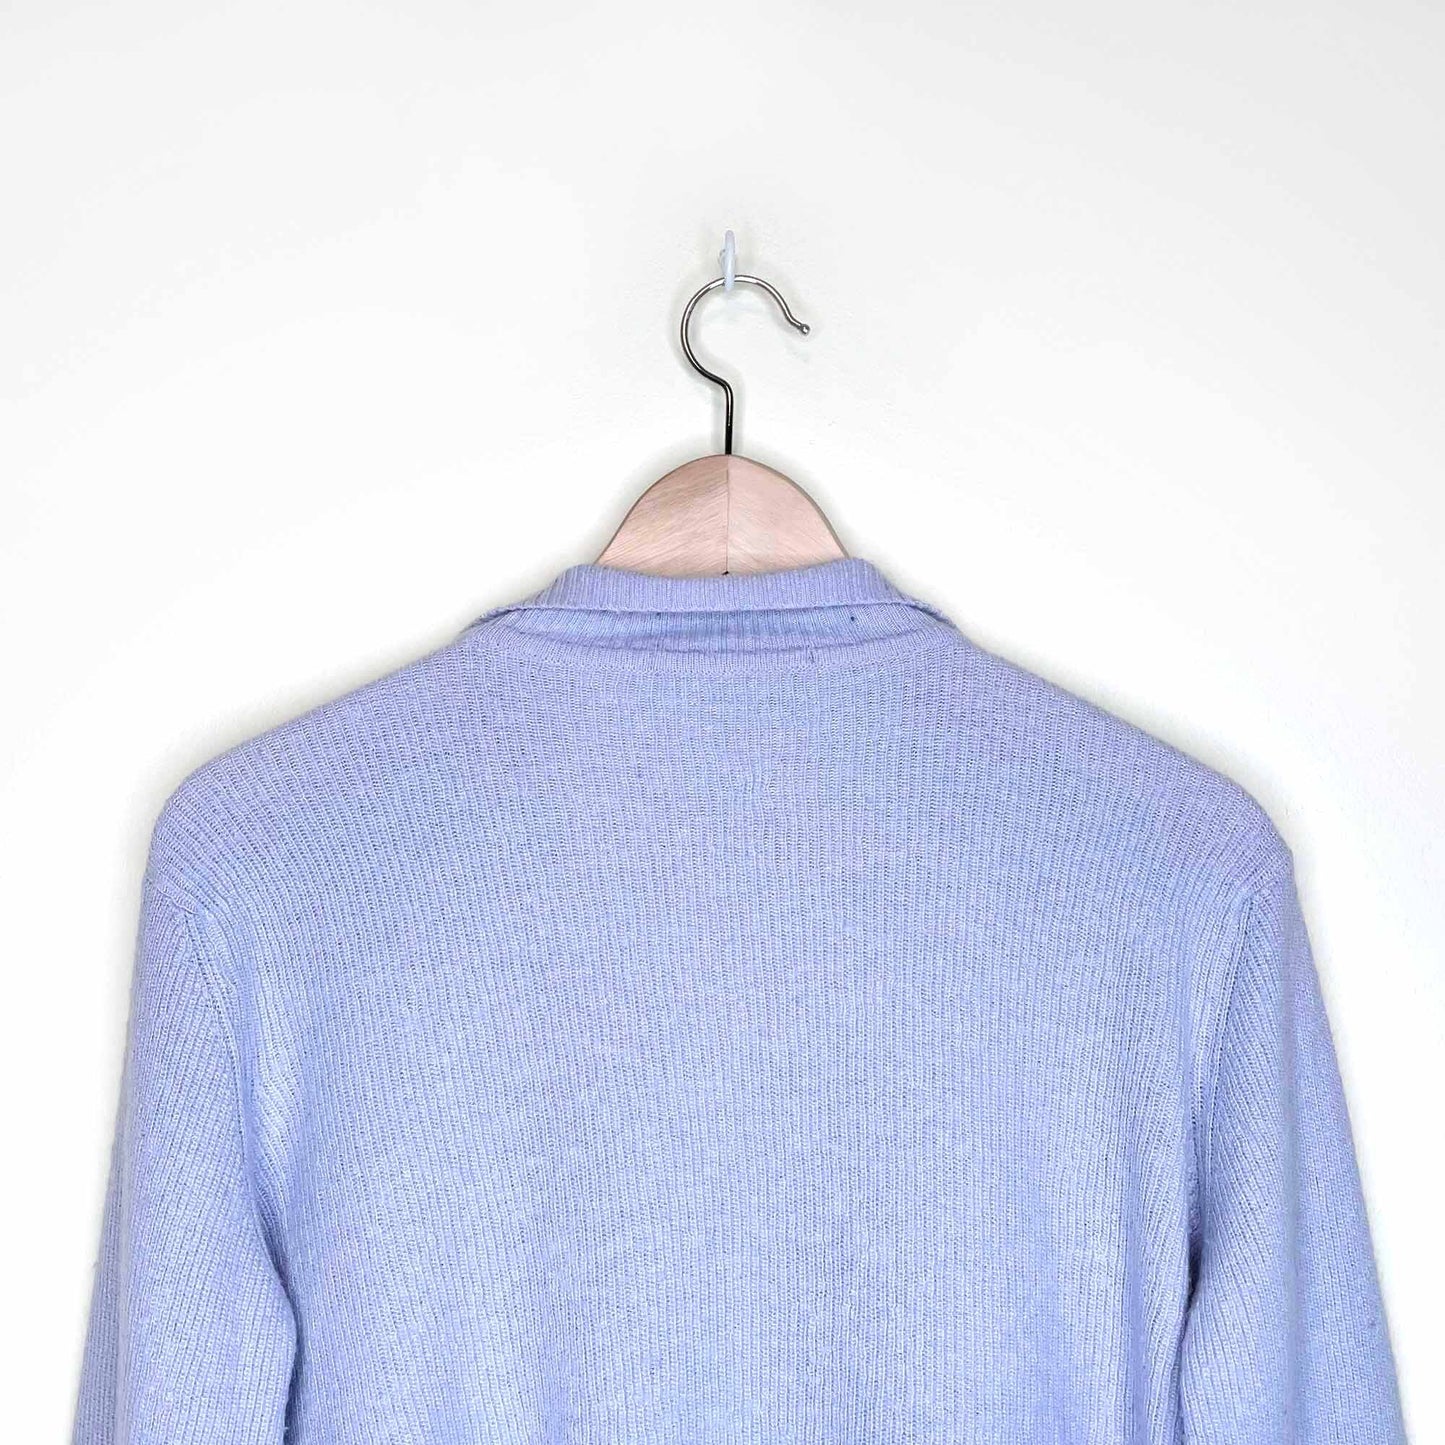 brandy melville cropped 1/4 zip natalie sweater - size small